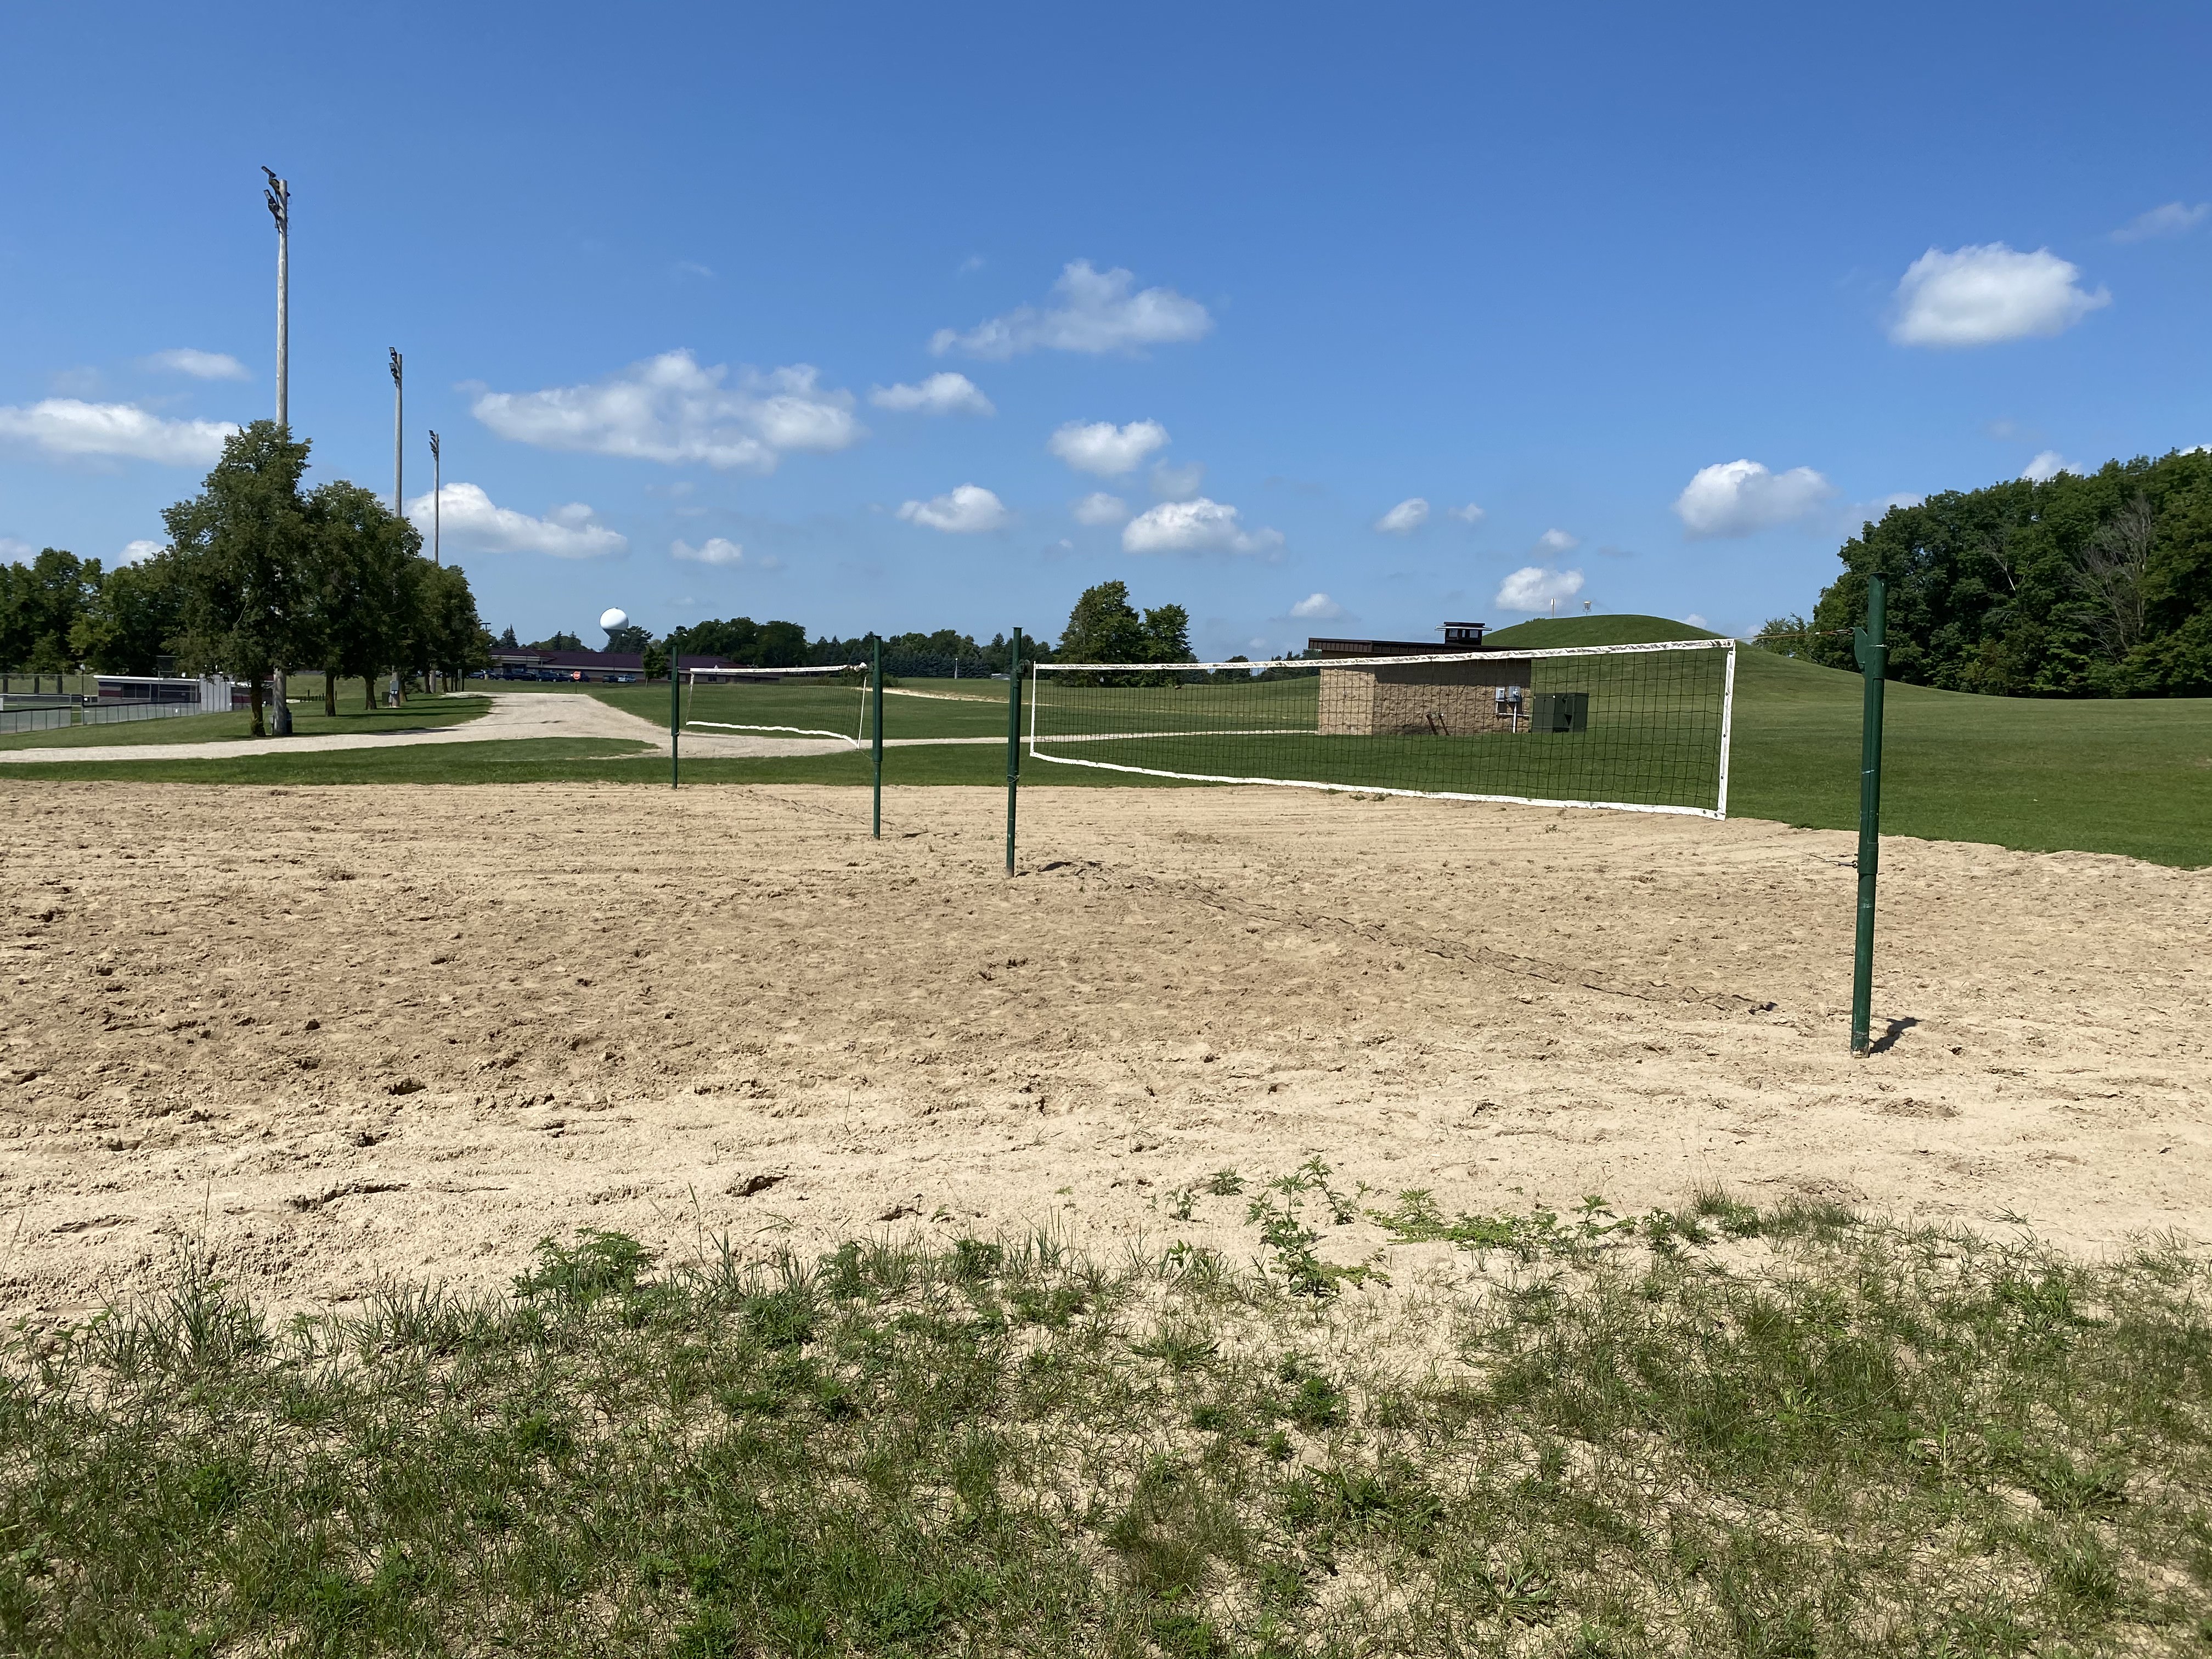 SAND VOLLEYBALL COURTS